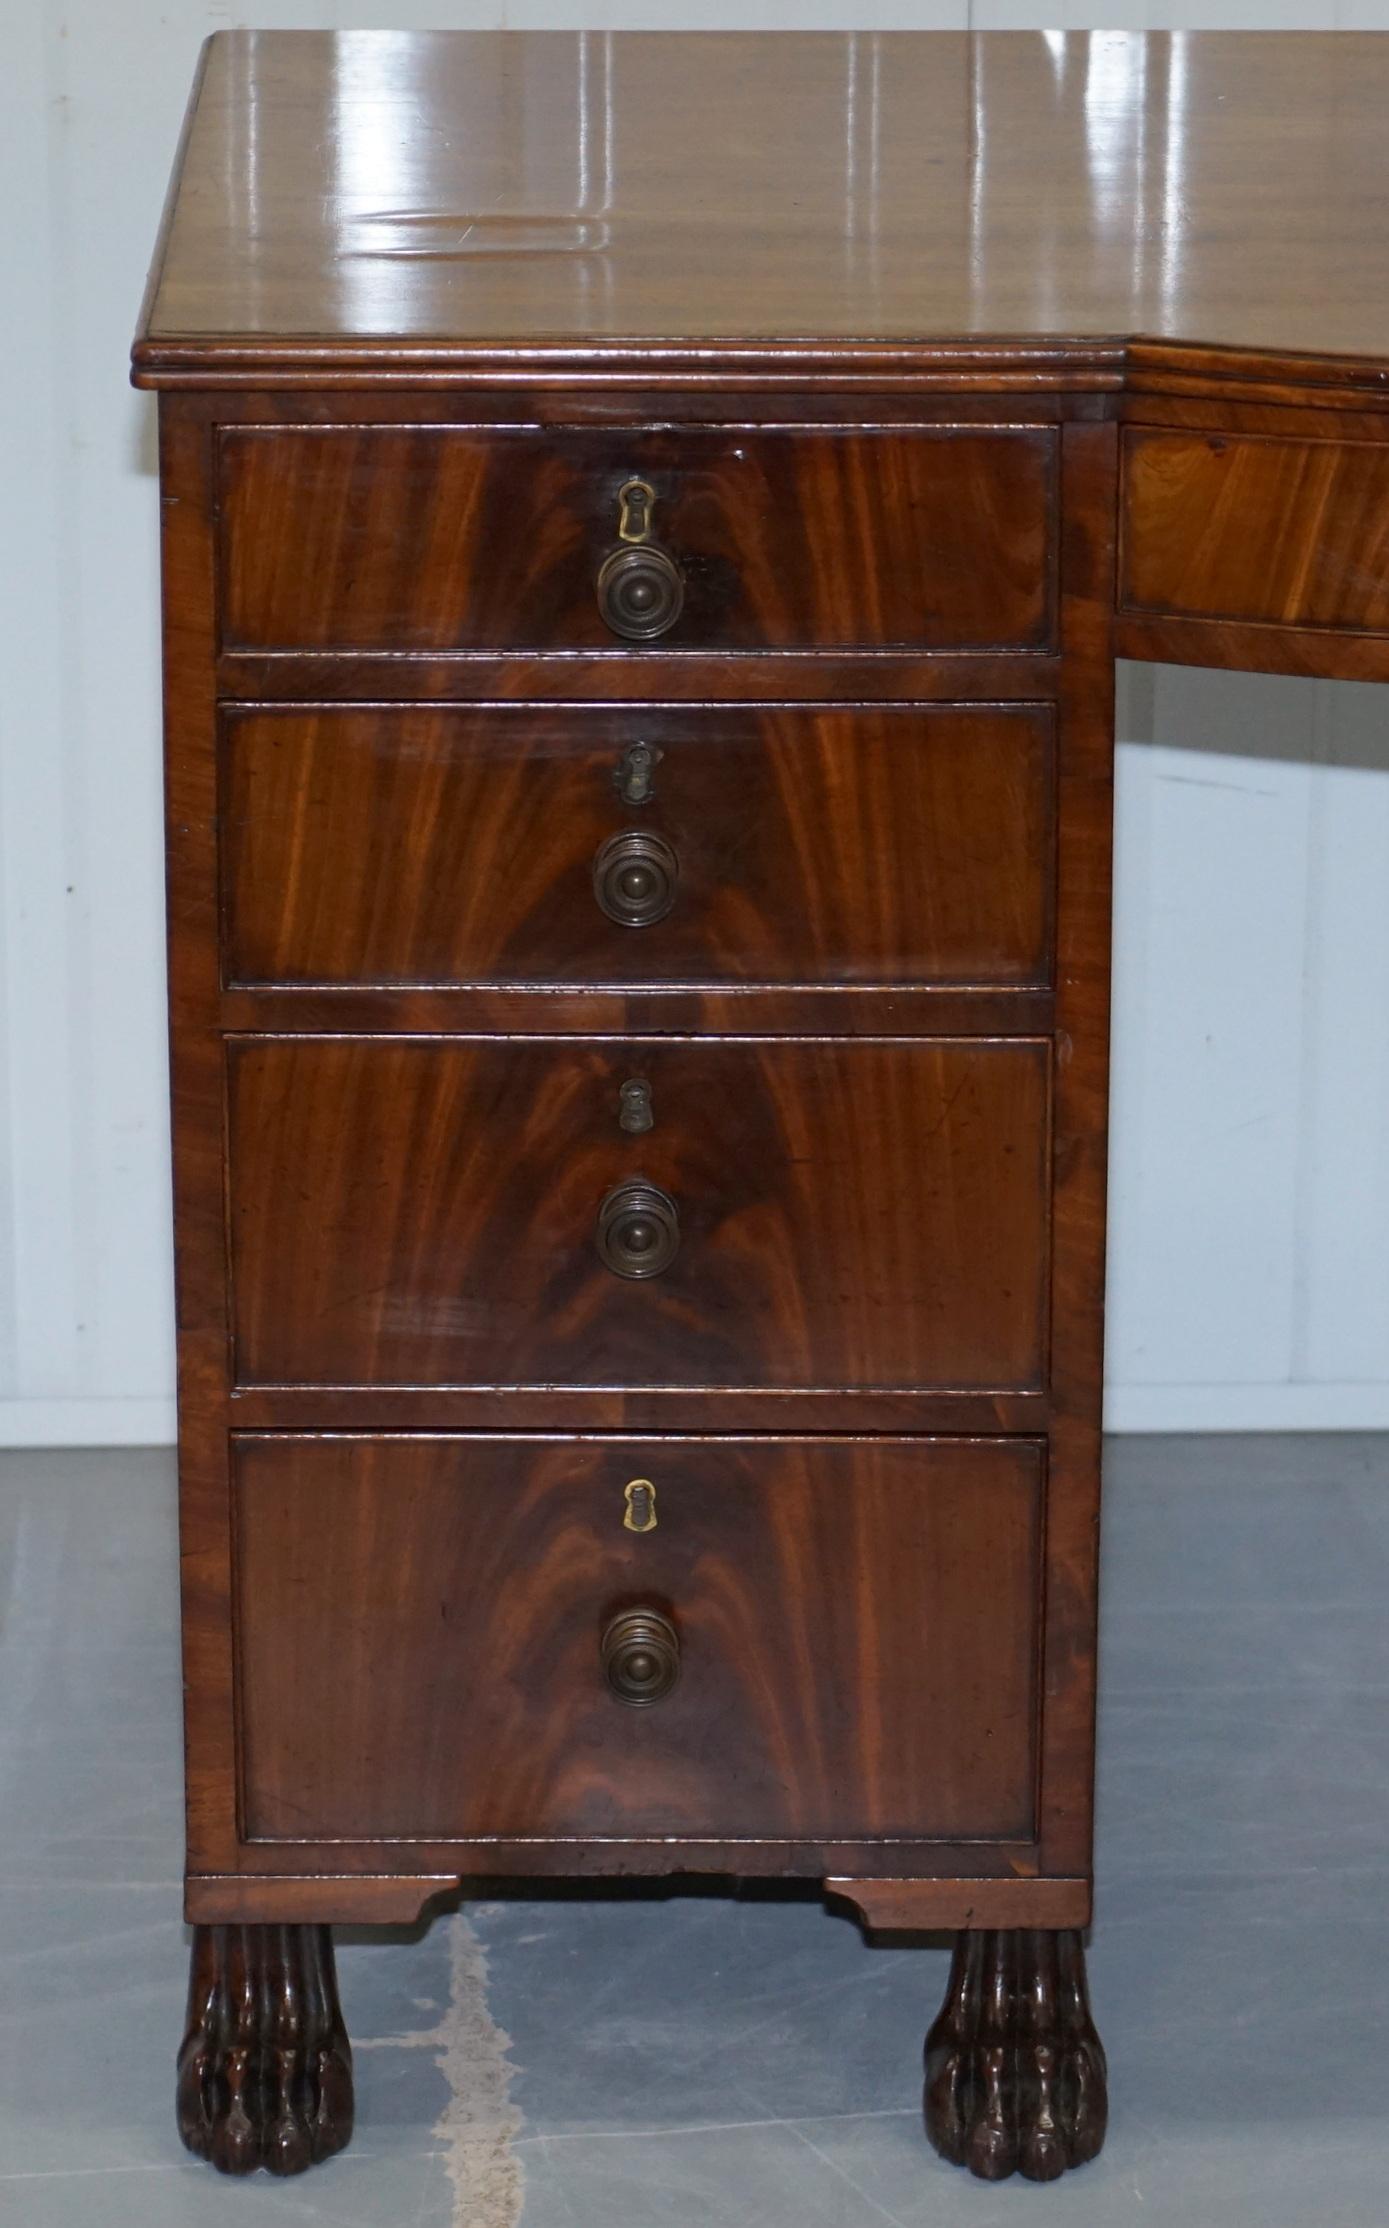 Exquisite Regency Period 1815 Hardwood Kneehole Desk with Lion Hairy Paw Feet For Sale 4